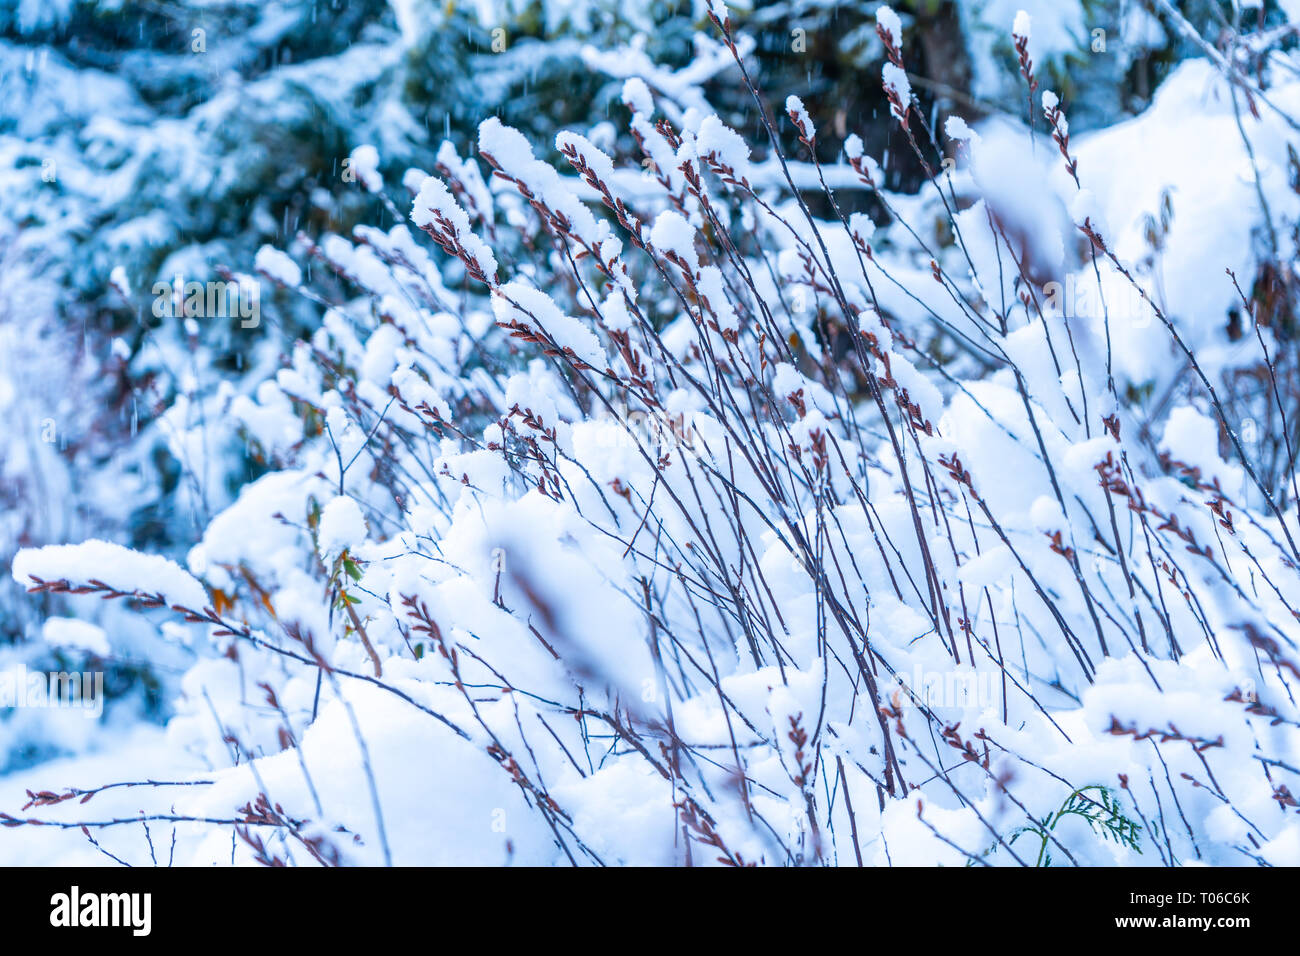 Background of snow covered tall grass stems or forest plant in winter, depicting winter weather, beauty in nature and winter beauty Stock Photo